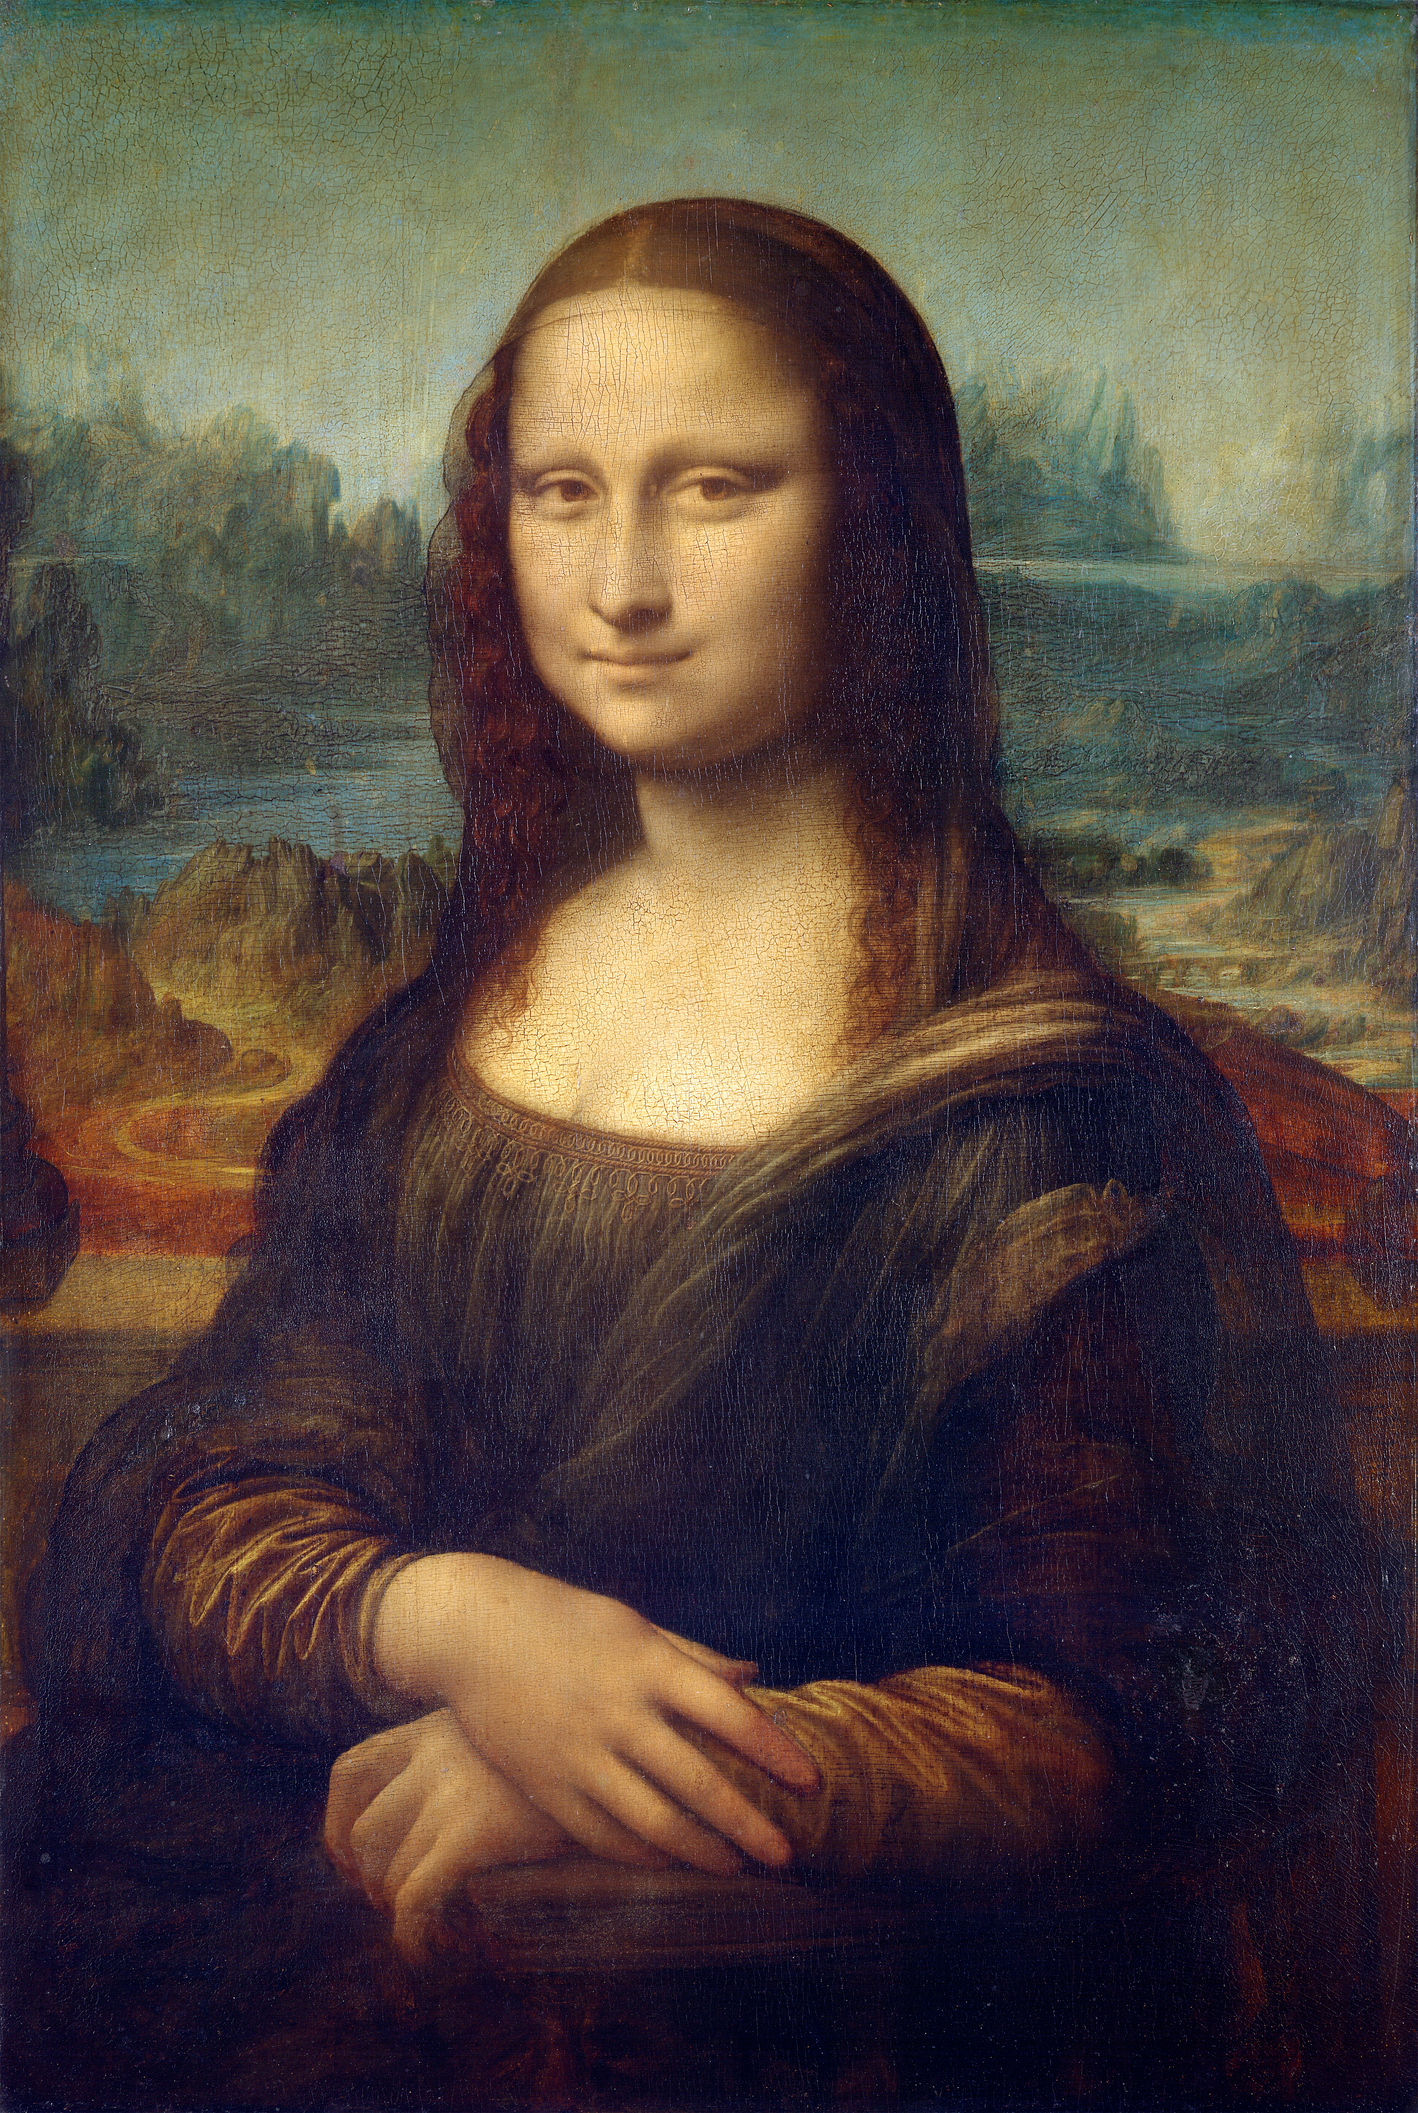 An Italian Geologist May Have Solved the Mystery of the Mona Lisa's Background 